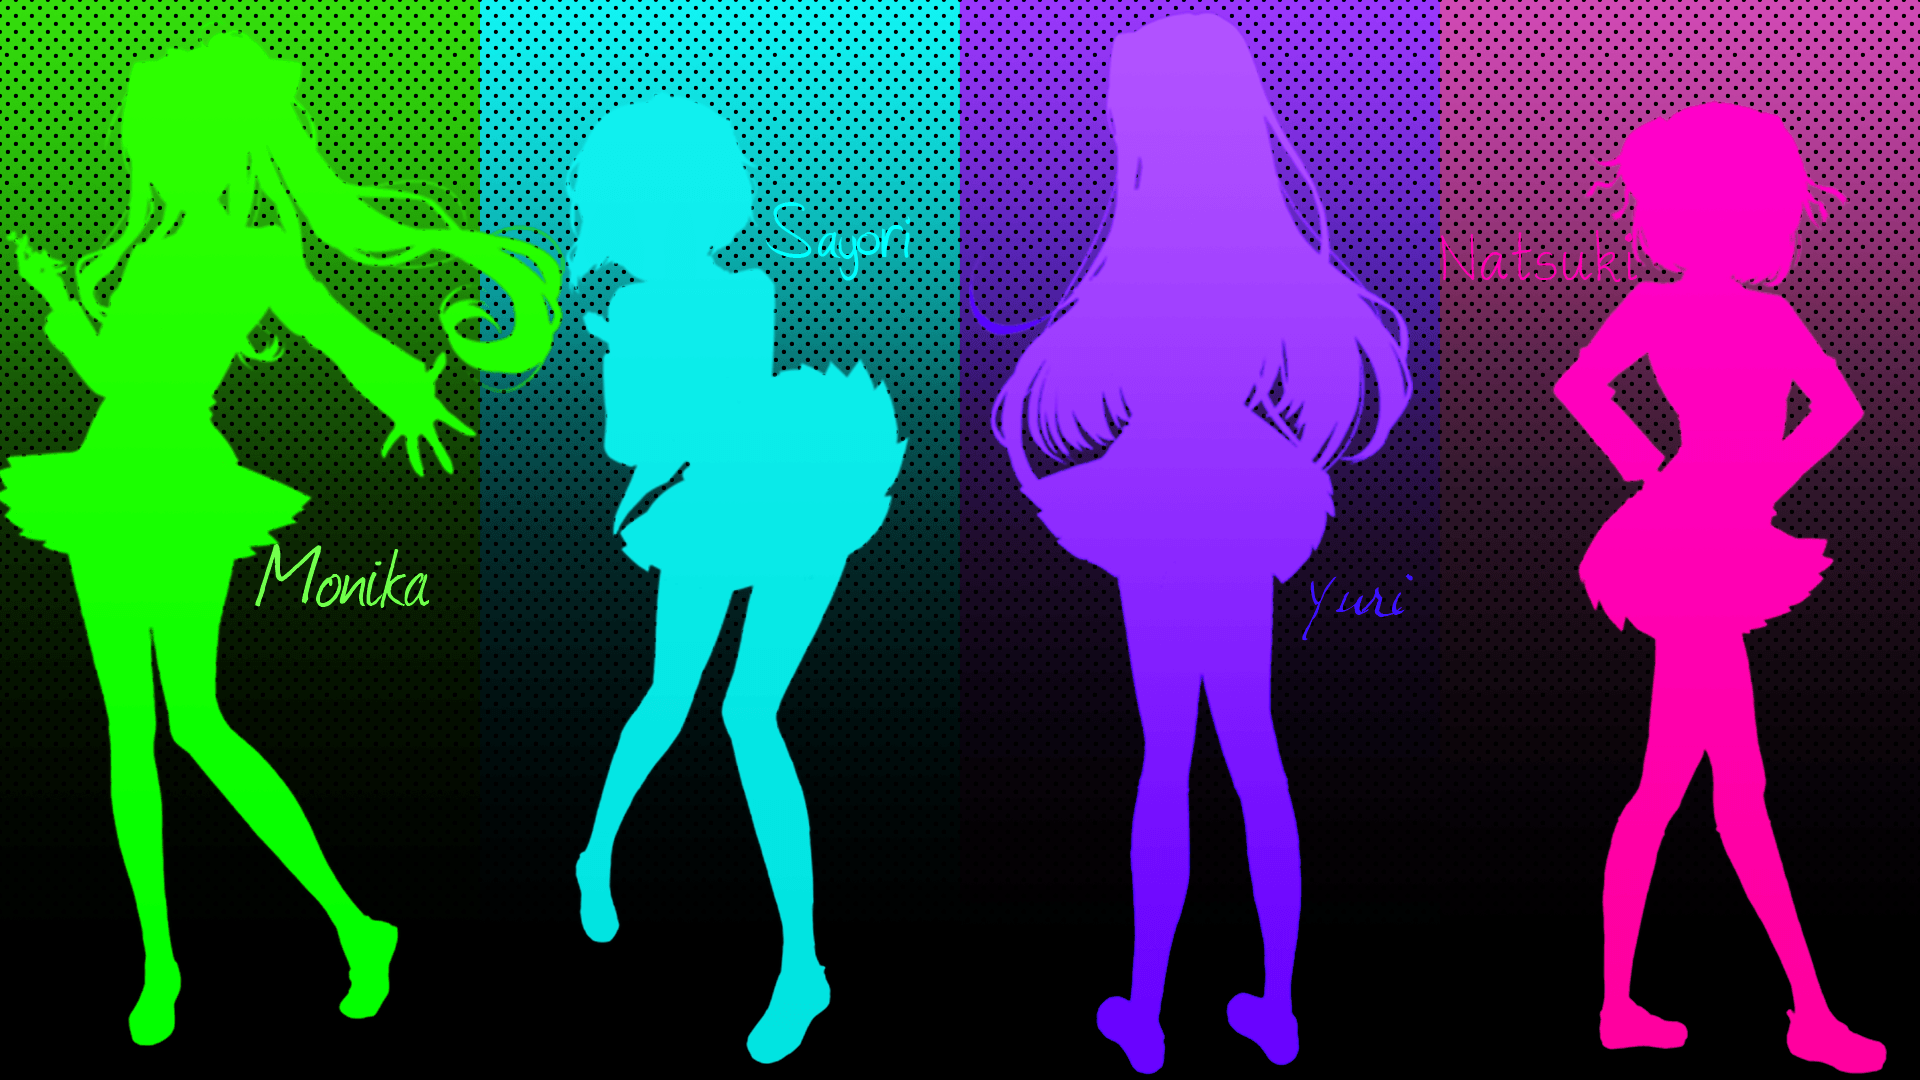 Fun Made a DDLC wallpaper if anyone wants to use it